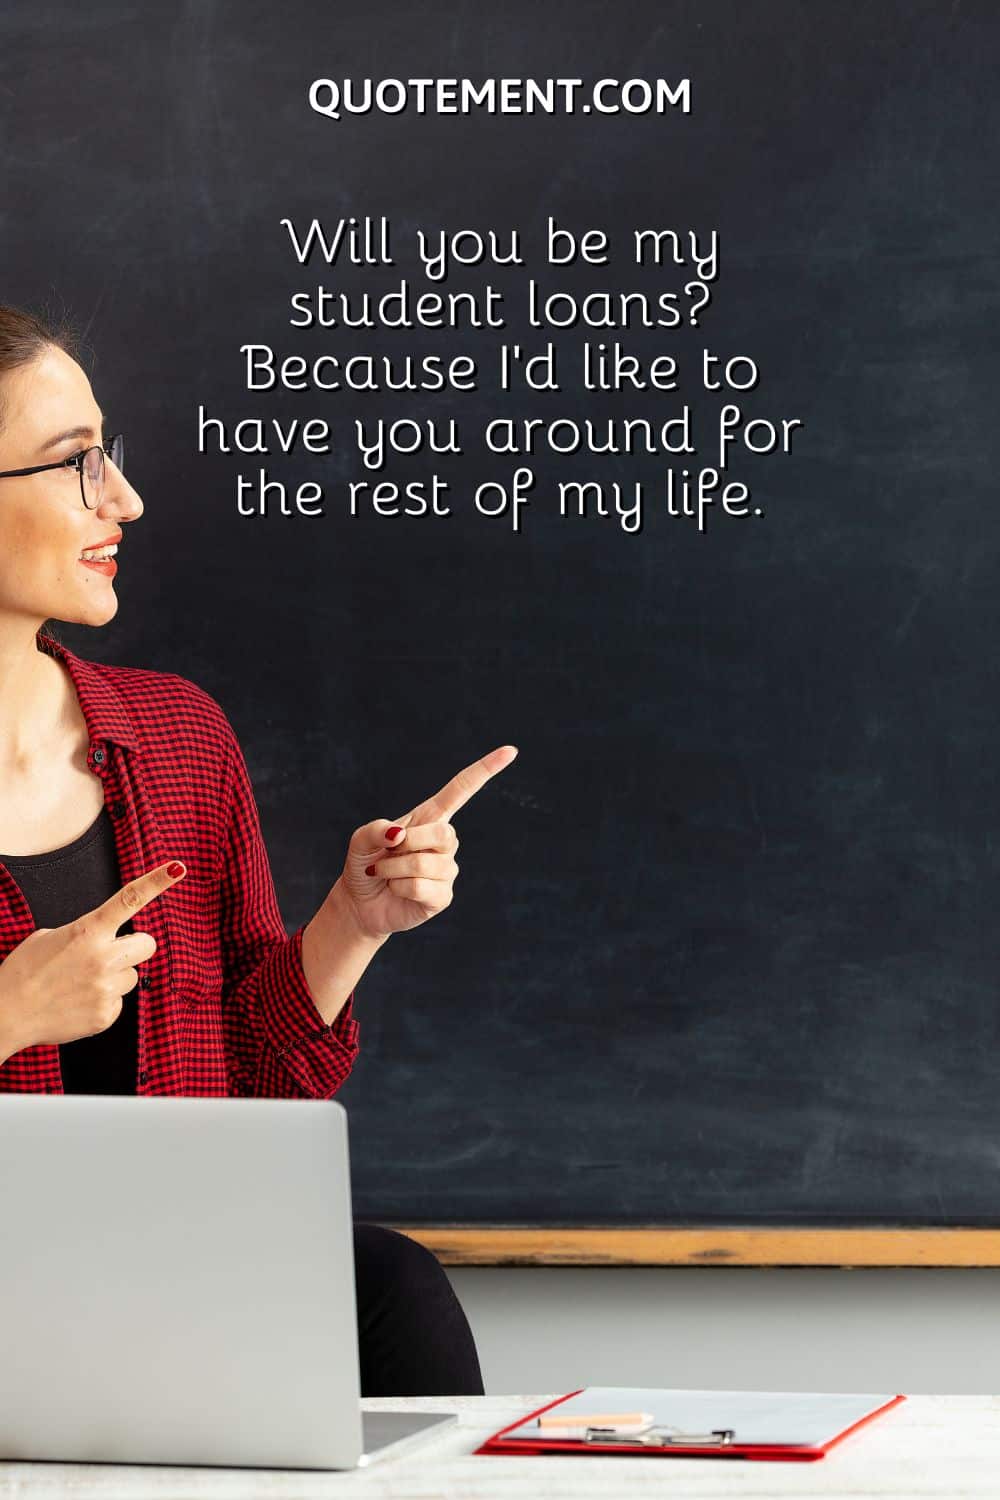 Will you be my student loans Because I'd like to have you around for the rest of my life